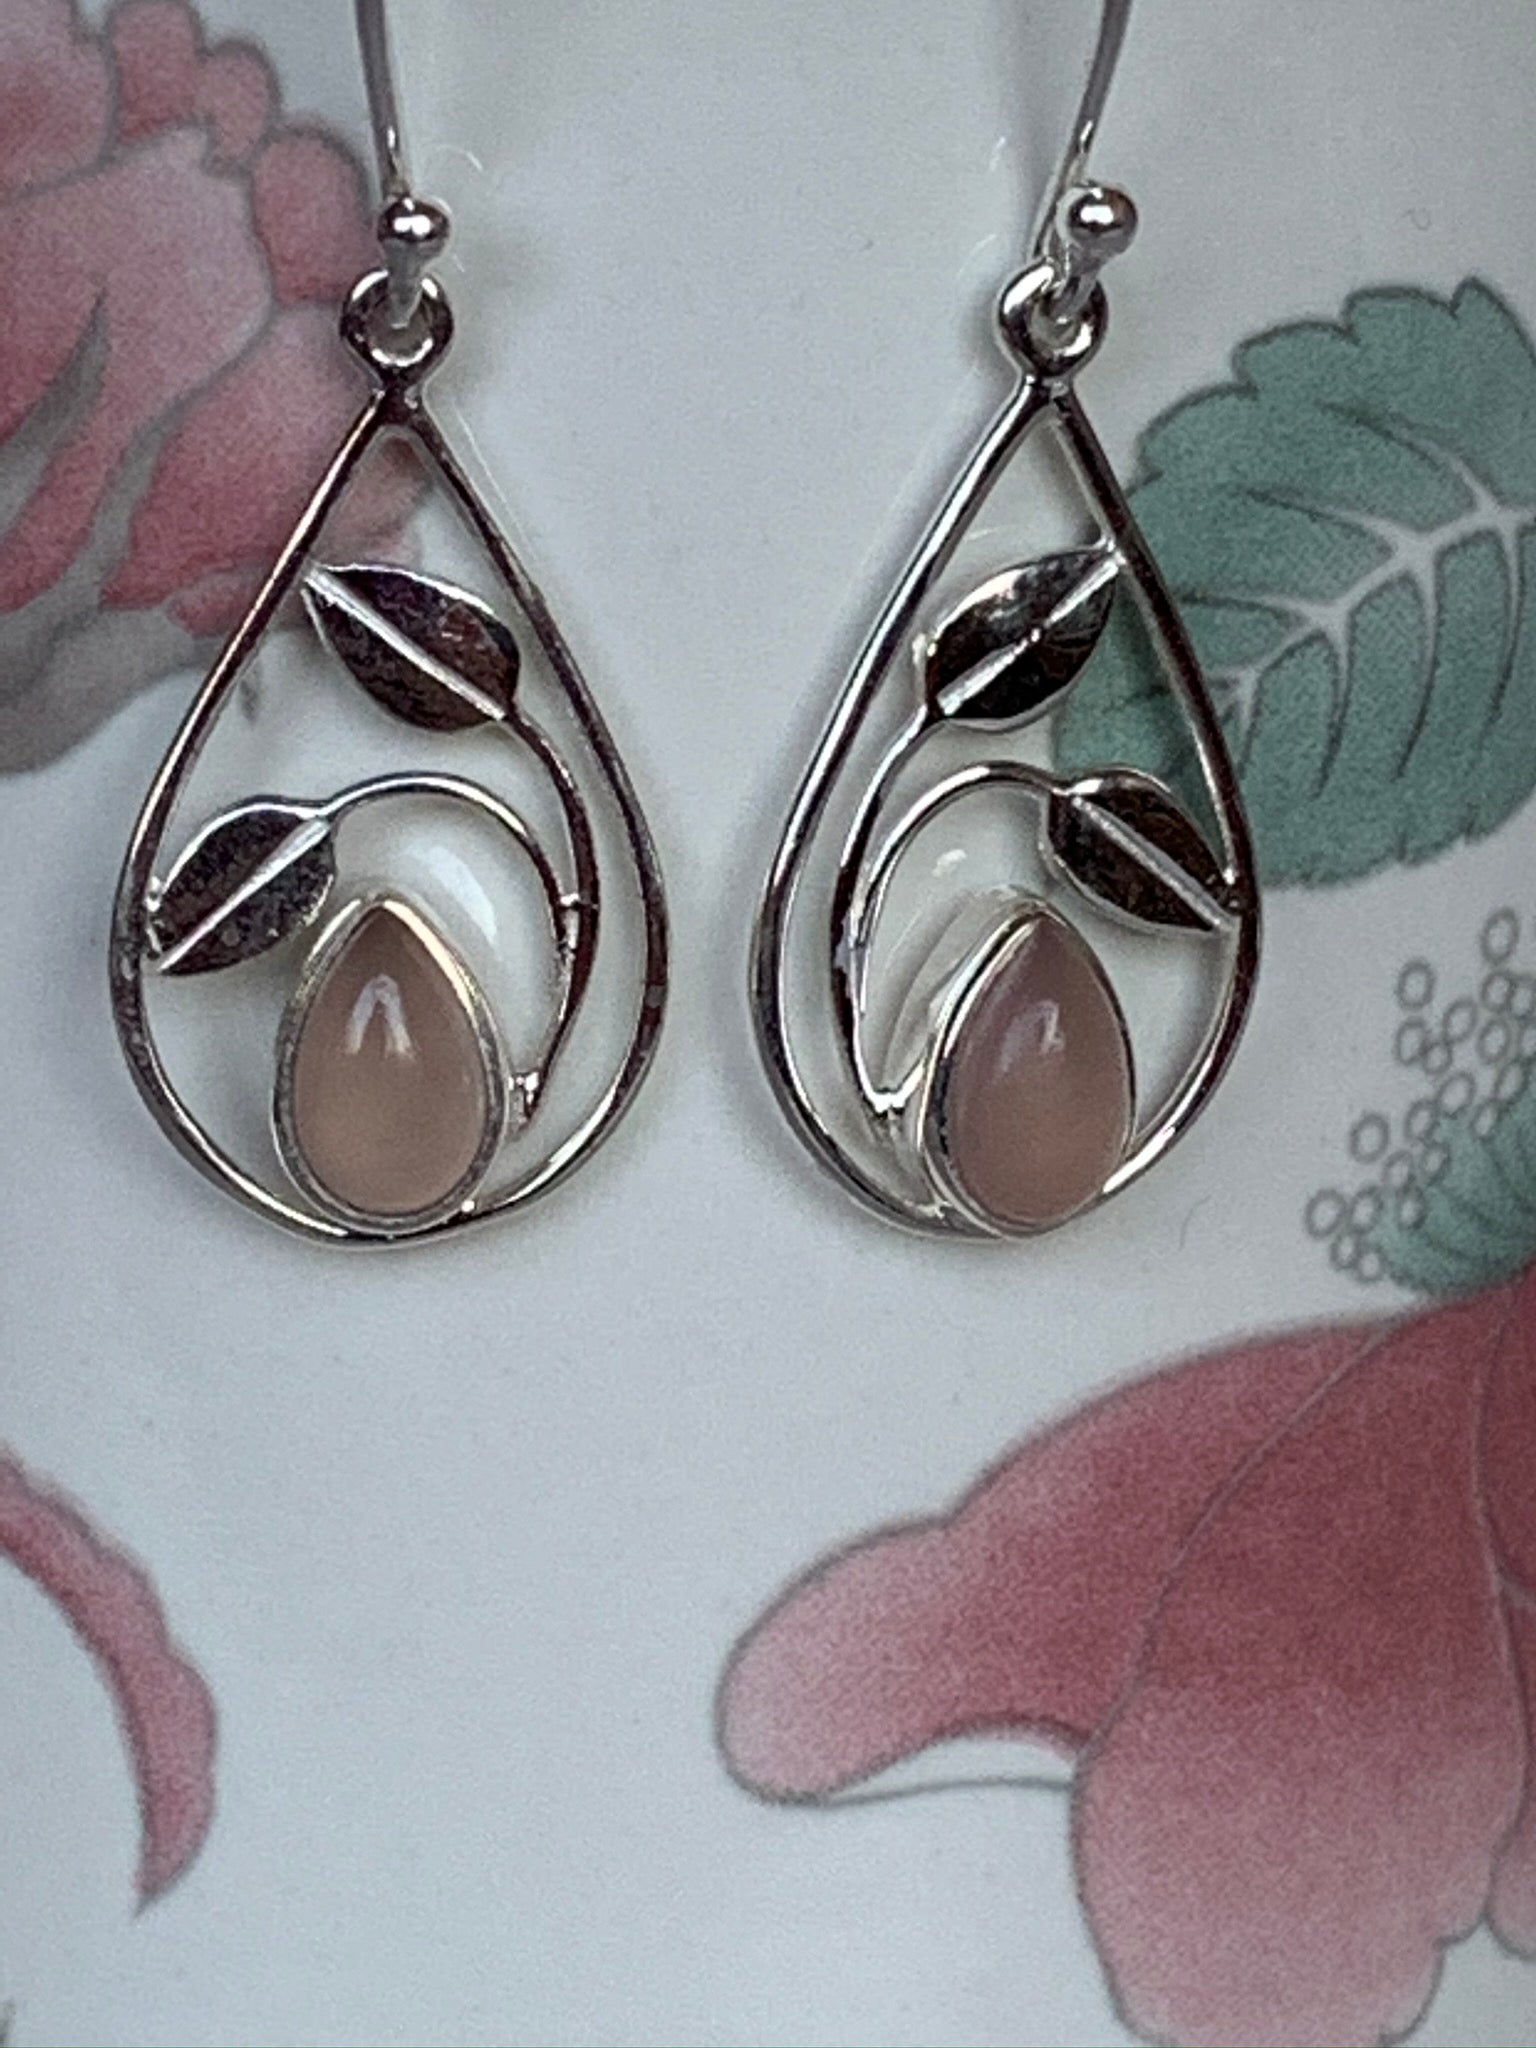 Close-up view, teardrop pink Chalcedony set in sterling silver at the bottom of an open sterling silver teardrop shape with sterling silver "swaying" leaves above. Wires, not posts. These earrings are lightweight and approximately 1¼" long.